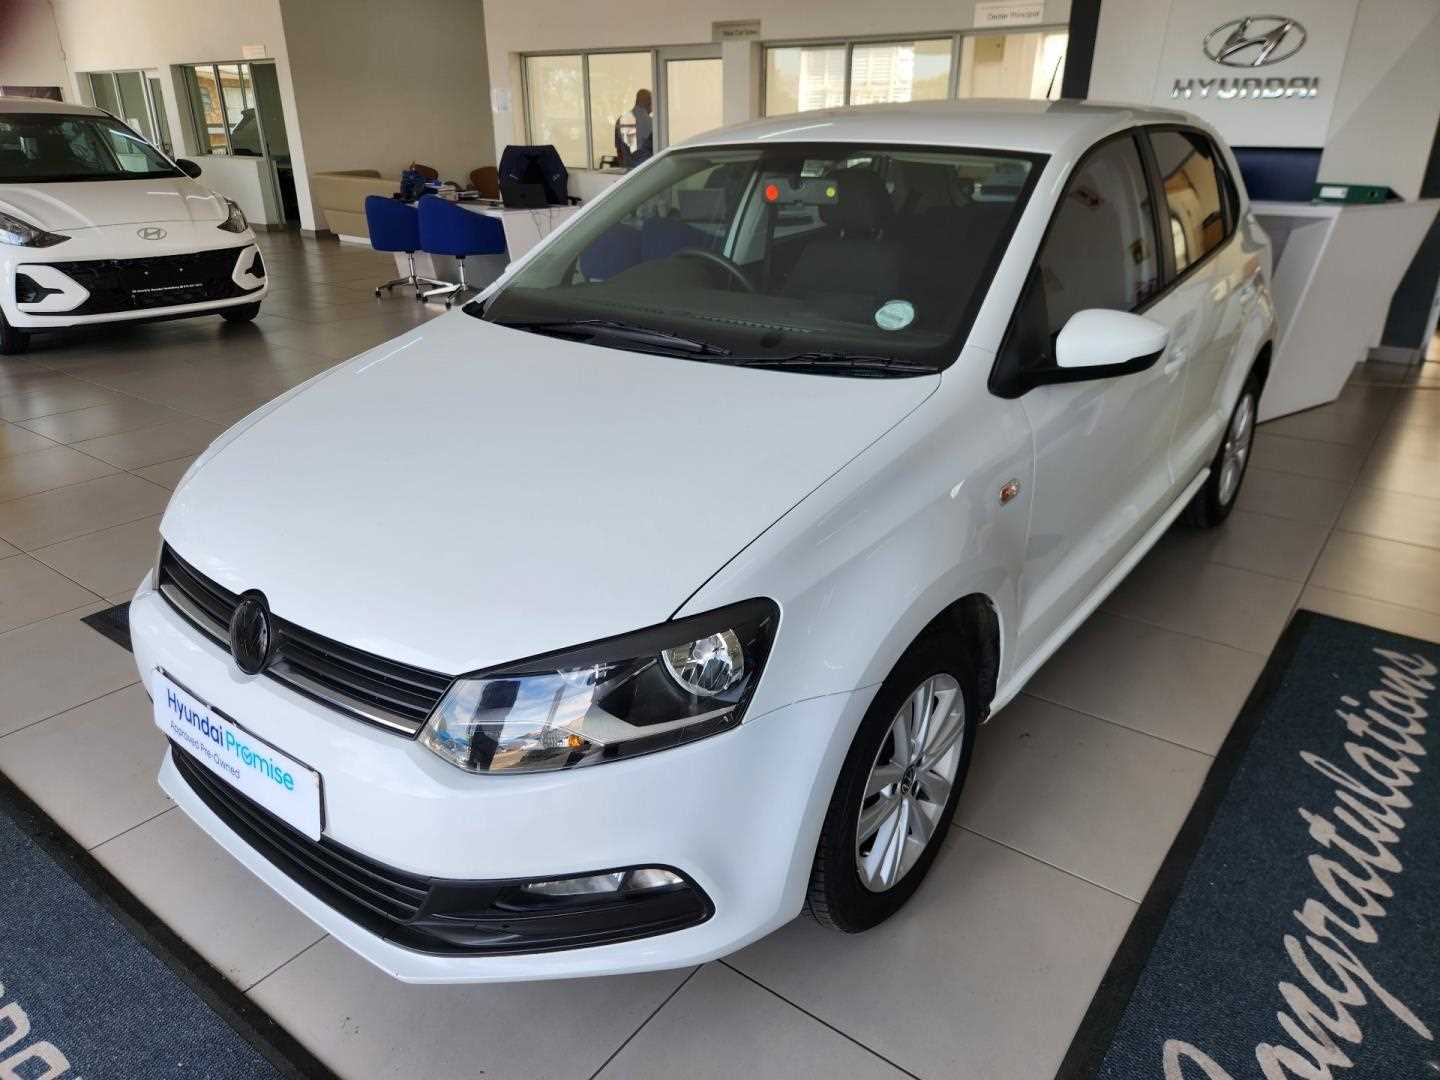 Volkswagen POLO VIVO 1.4 COMFORTLINE (5DR) for Sale in South Africa